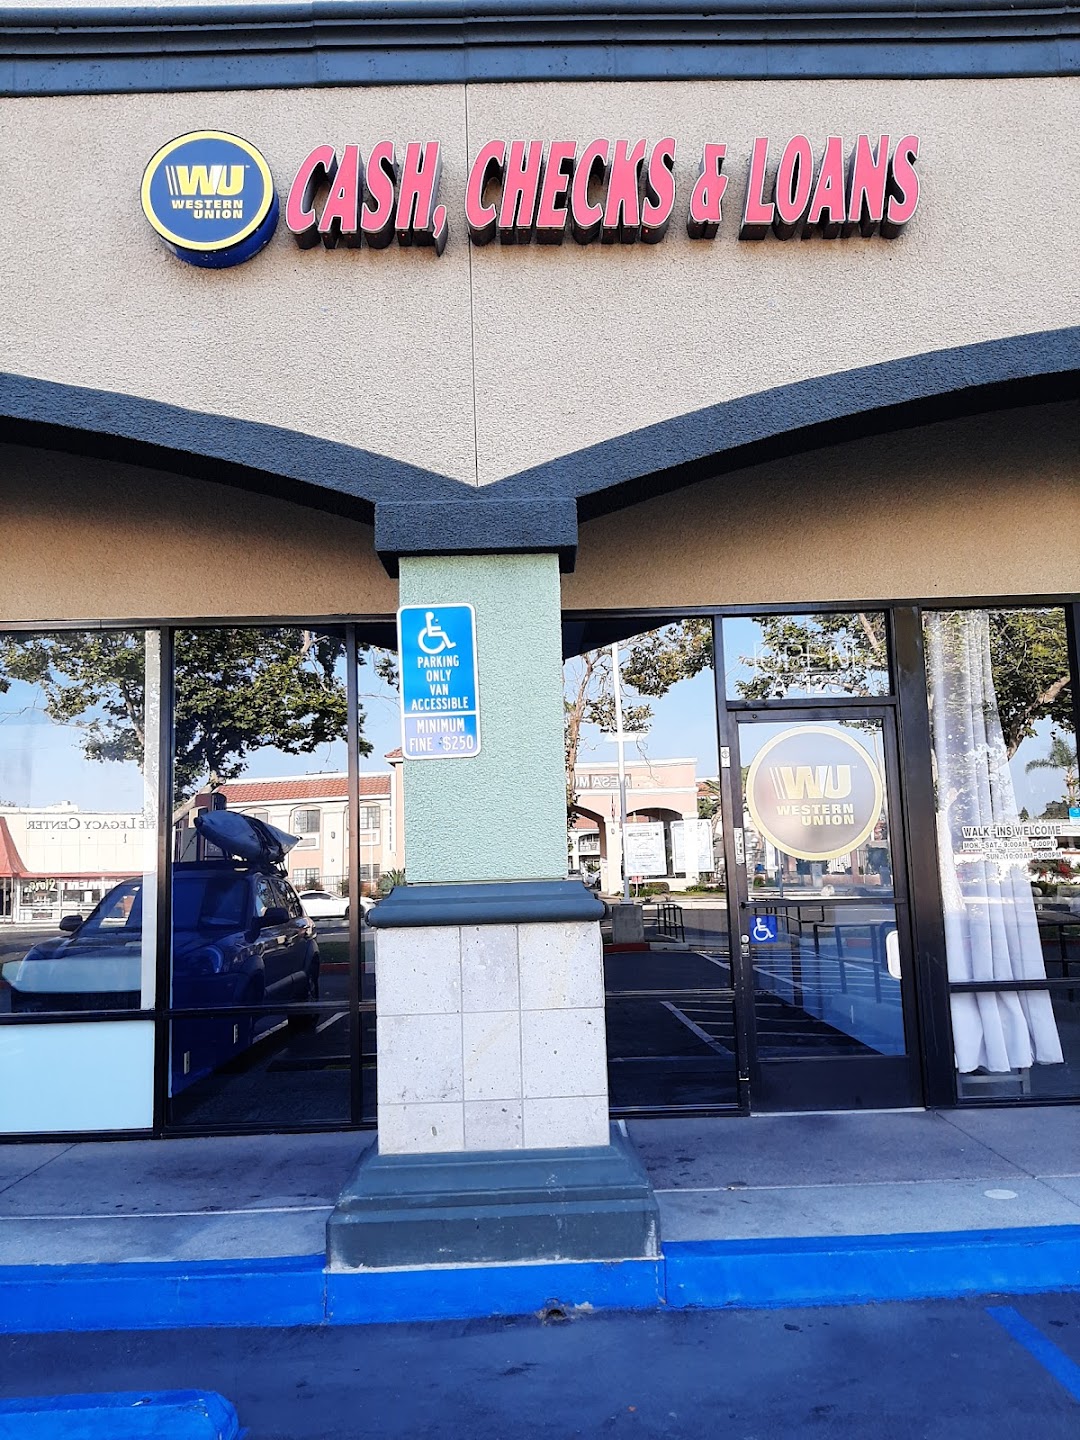 Transpacific Currency Services (TCS)-Costa Mesa